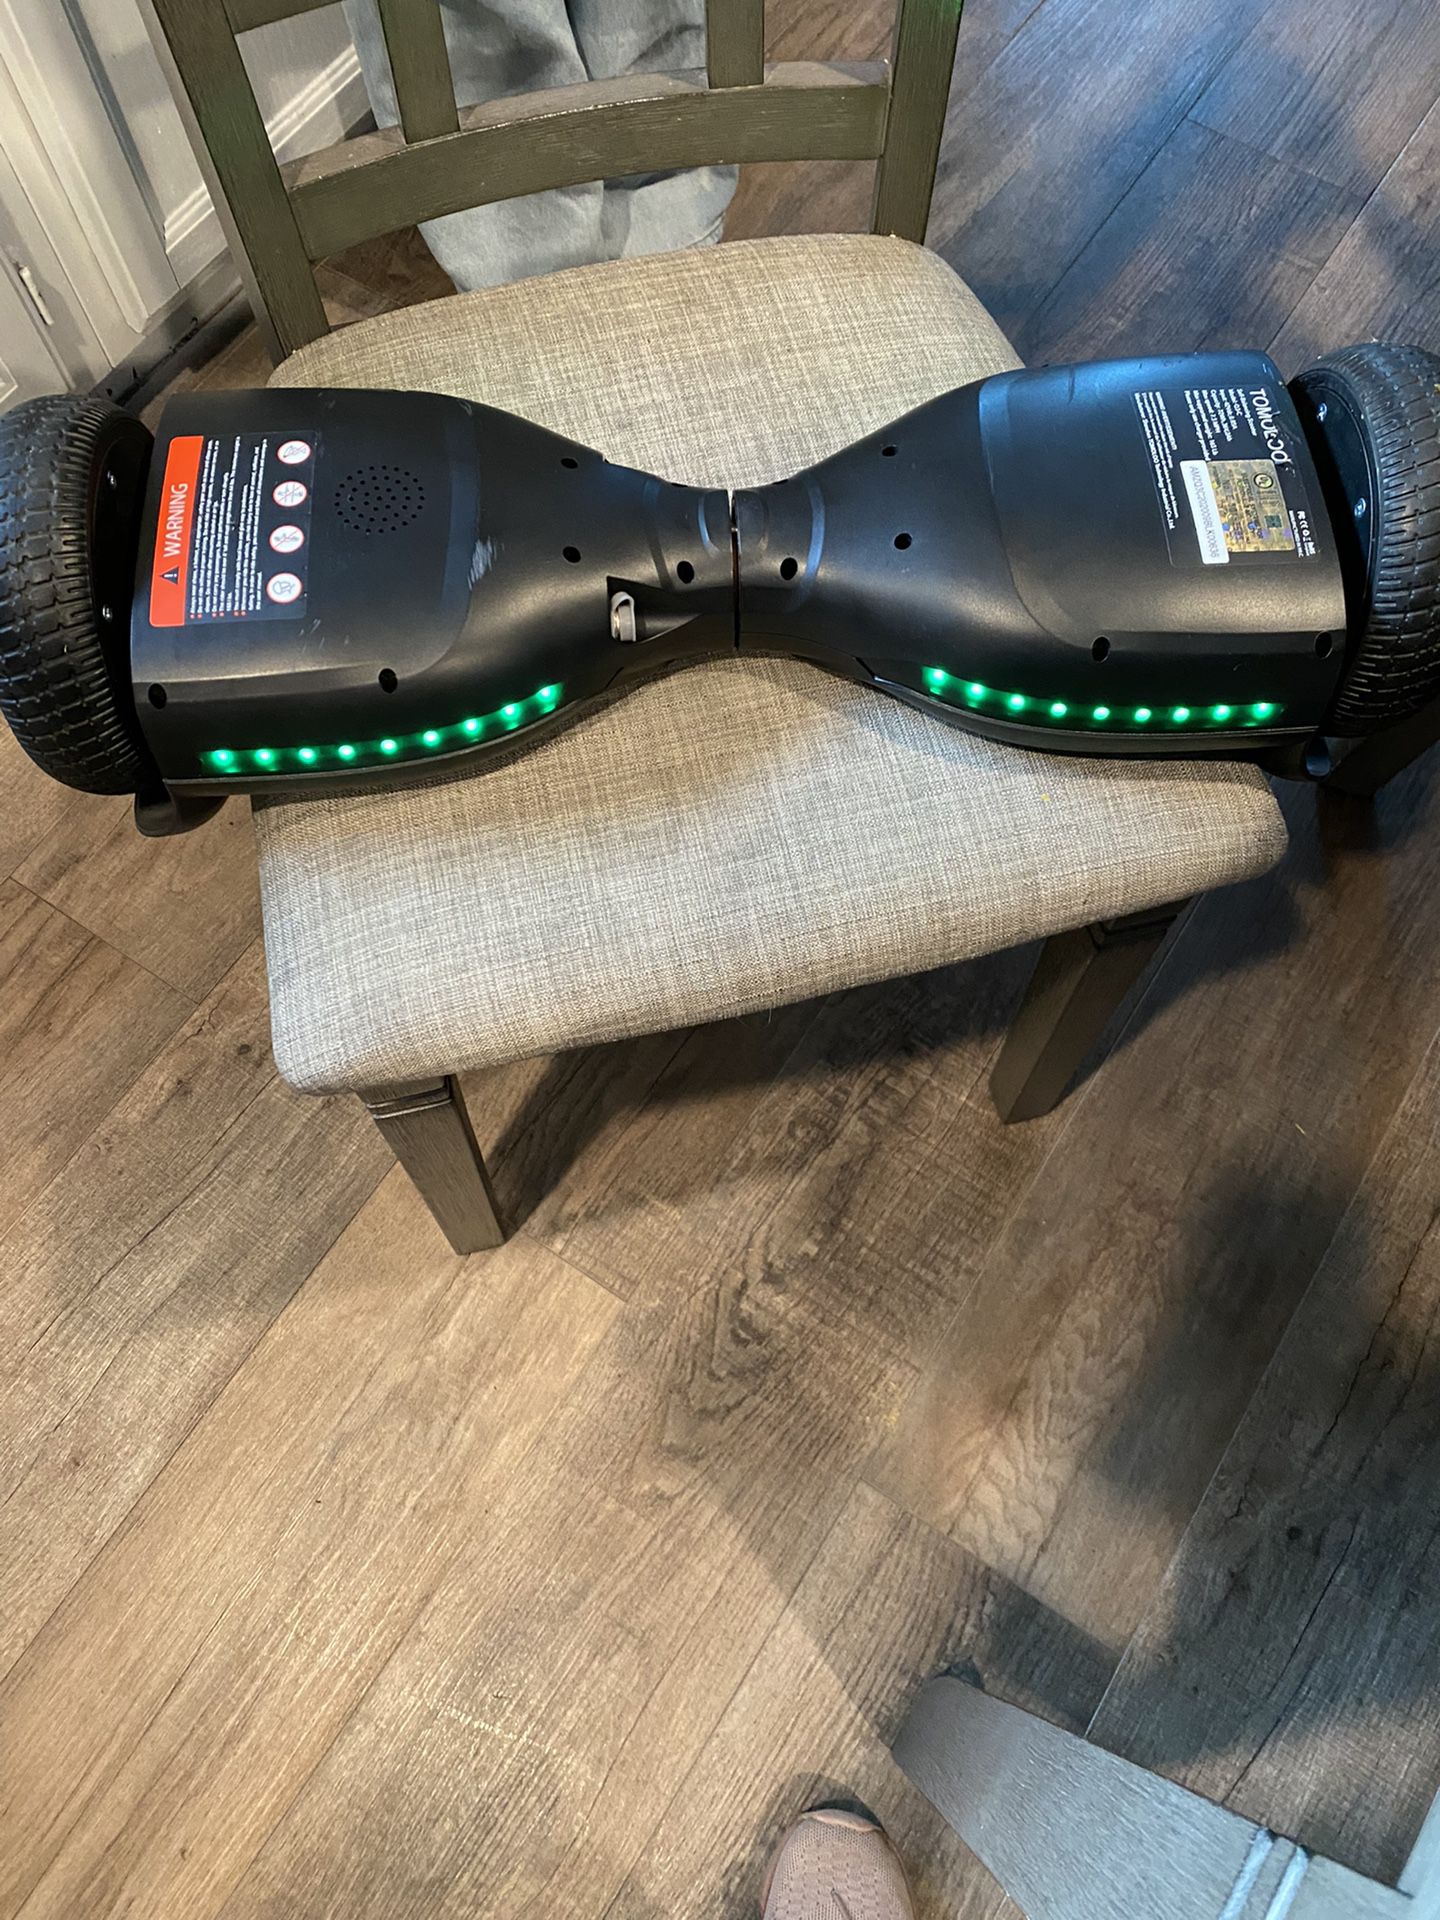 HOVER BOARD** TOMOLOHoverboard, Electric Self Balancing Smart Scooter, ul 2272 Certified Hover Board 6.5 Two Wheel with Music Speaker and 